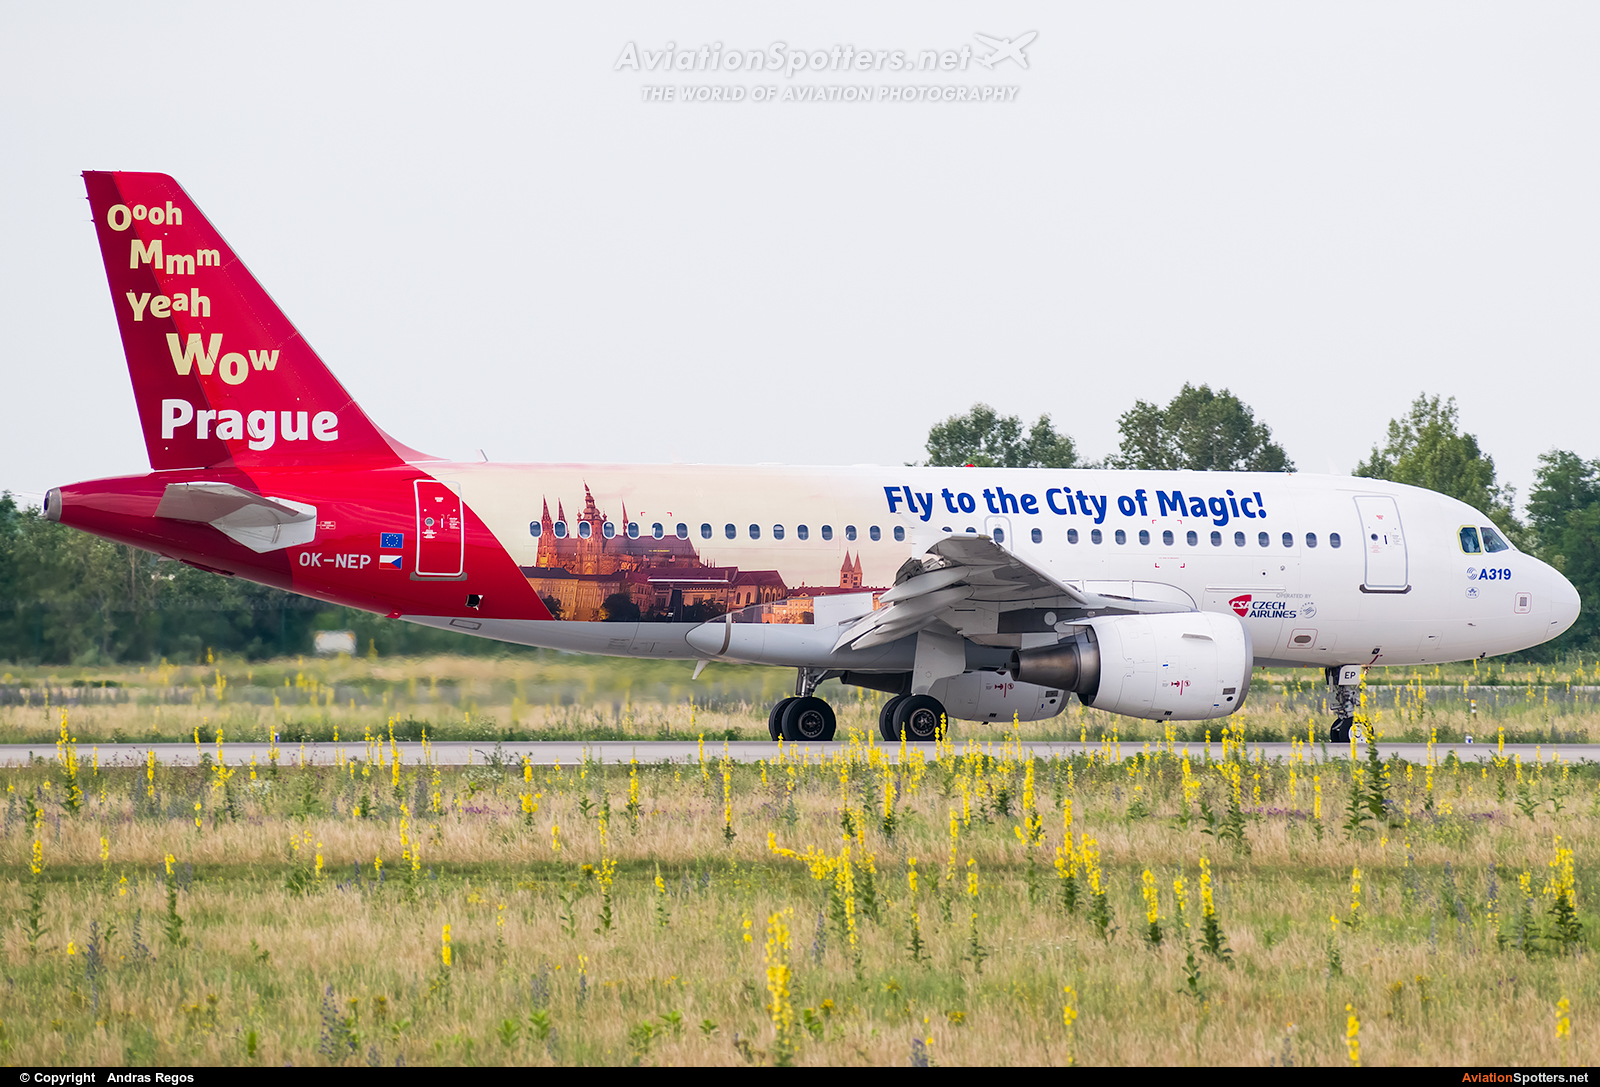 CSA - Czech Airlines  -  A319-112  (OK-NEP) By Andras Regos (regos)